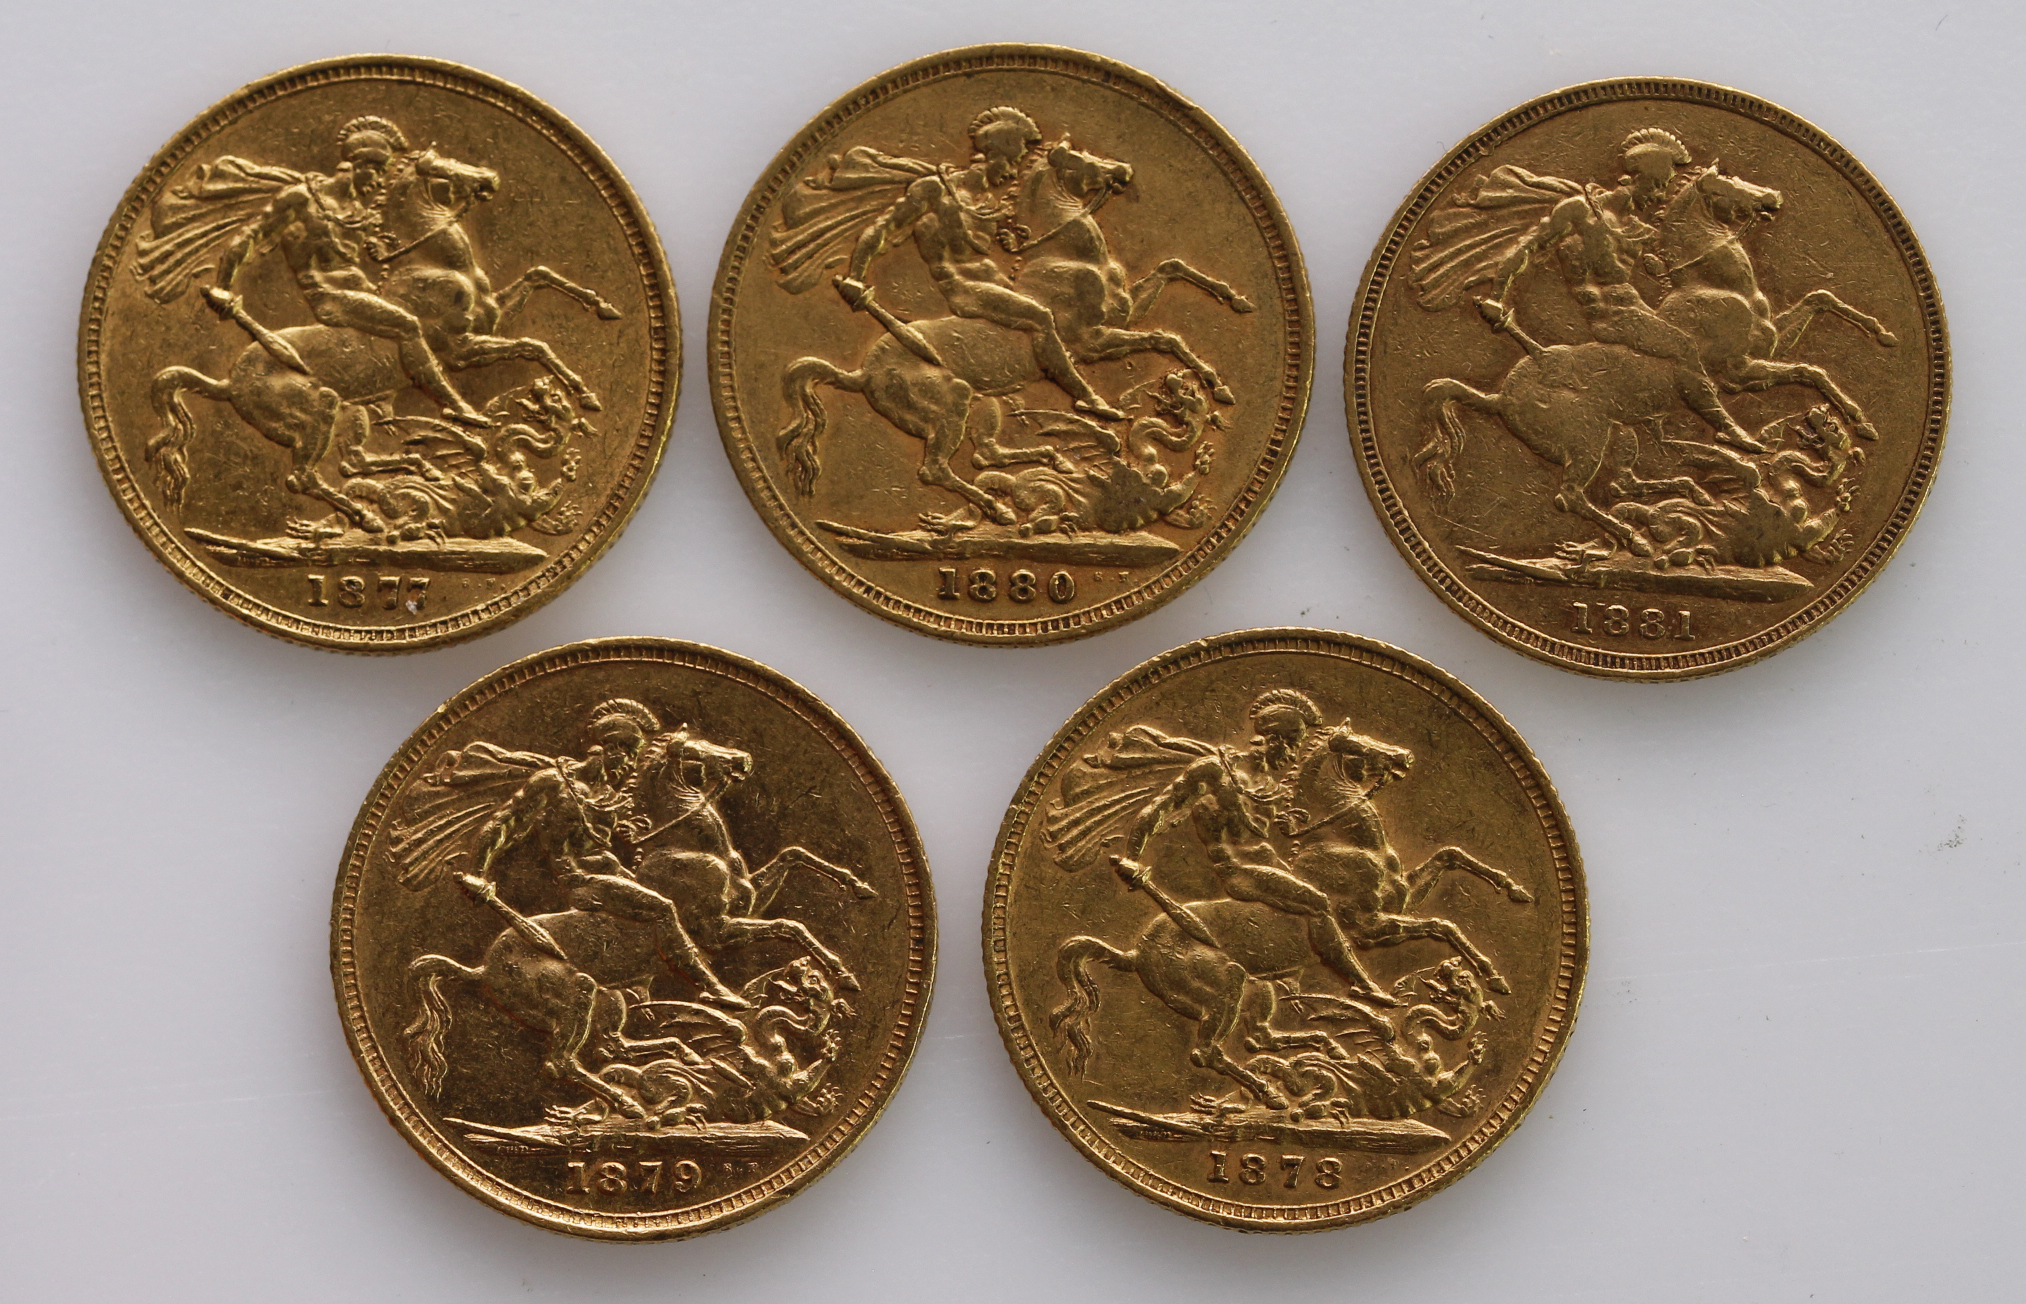 Sovereigns (5) All St George Melbourne Mint. 1877, 1878, 1879, 1880 & 1881. nVF - GVF - Image 2 of 2